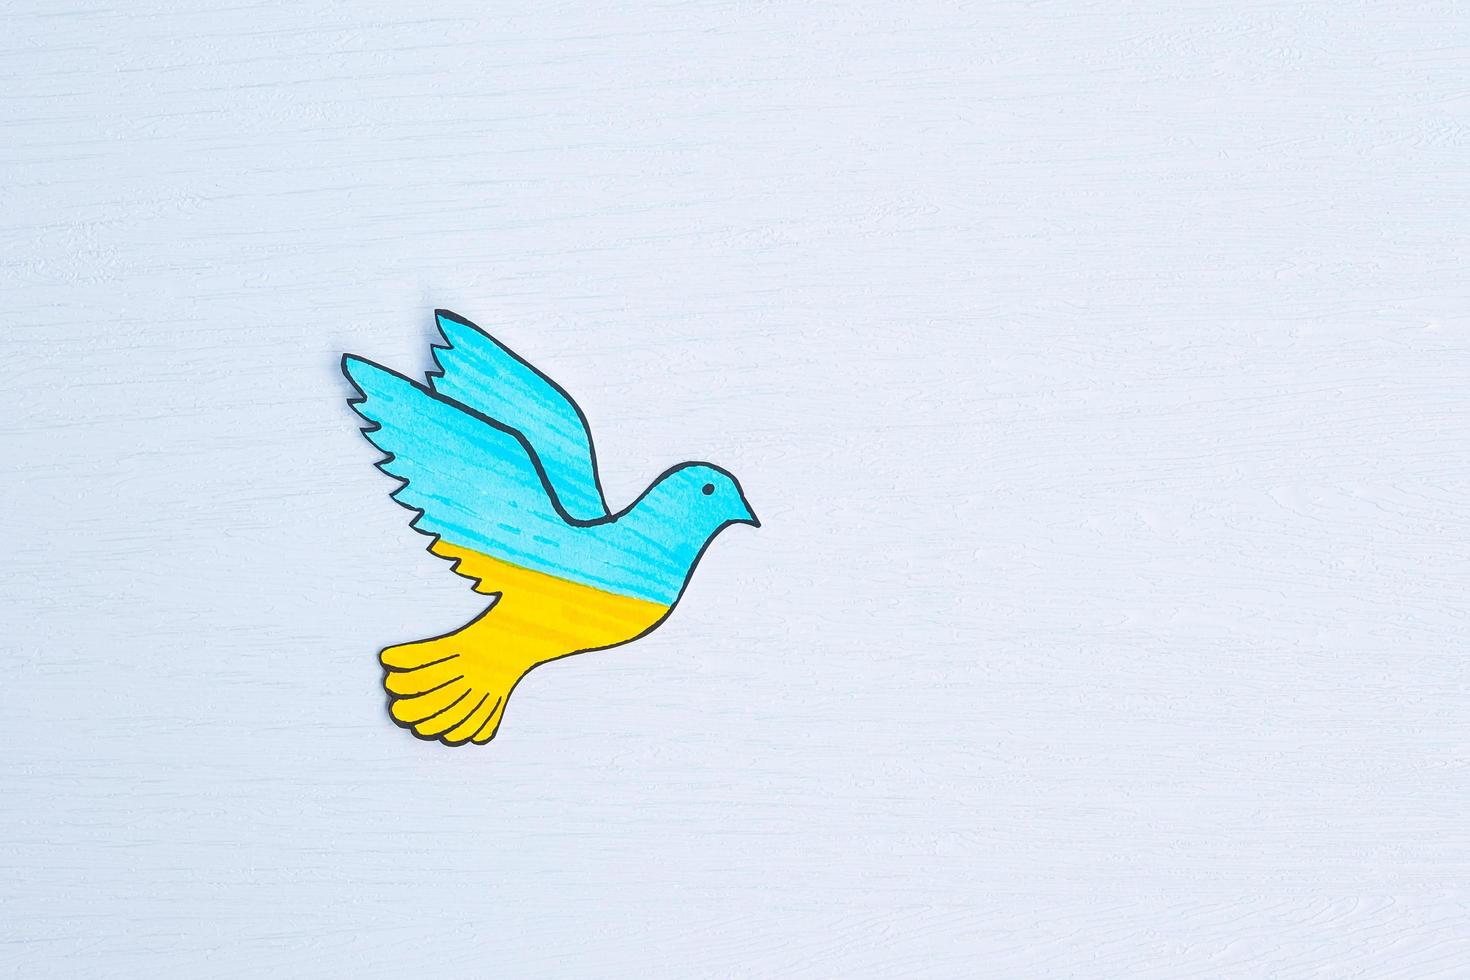 Support for Ukraine in the war with Russia, peace dove with flag of Ukraine. Pray, No war, stop war and stand with Ukraine concepts photo